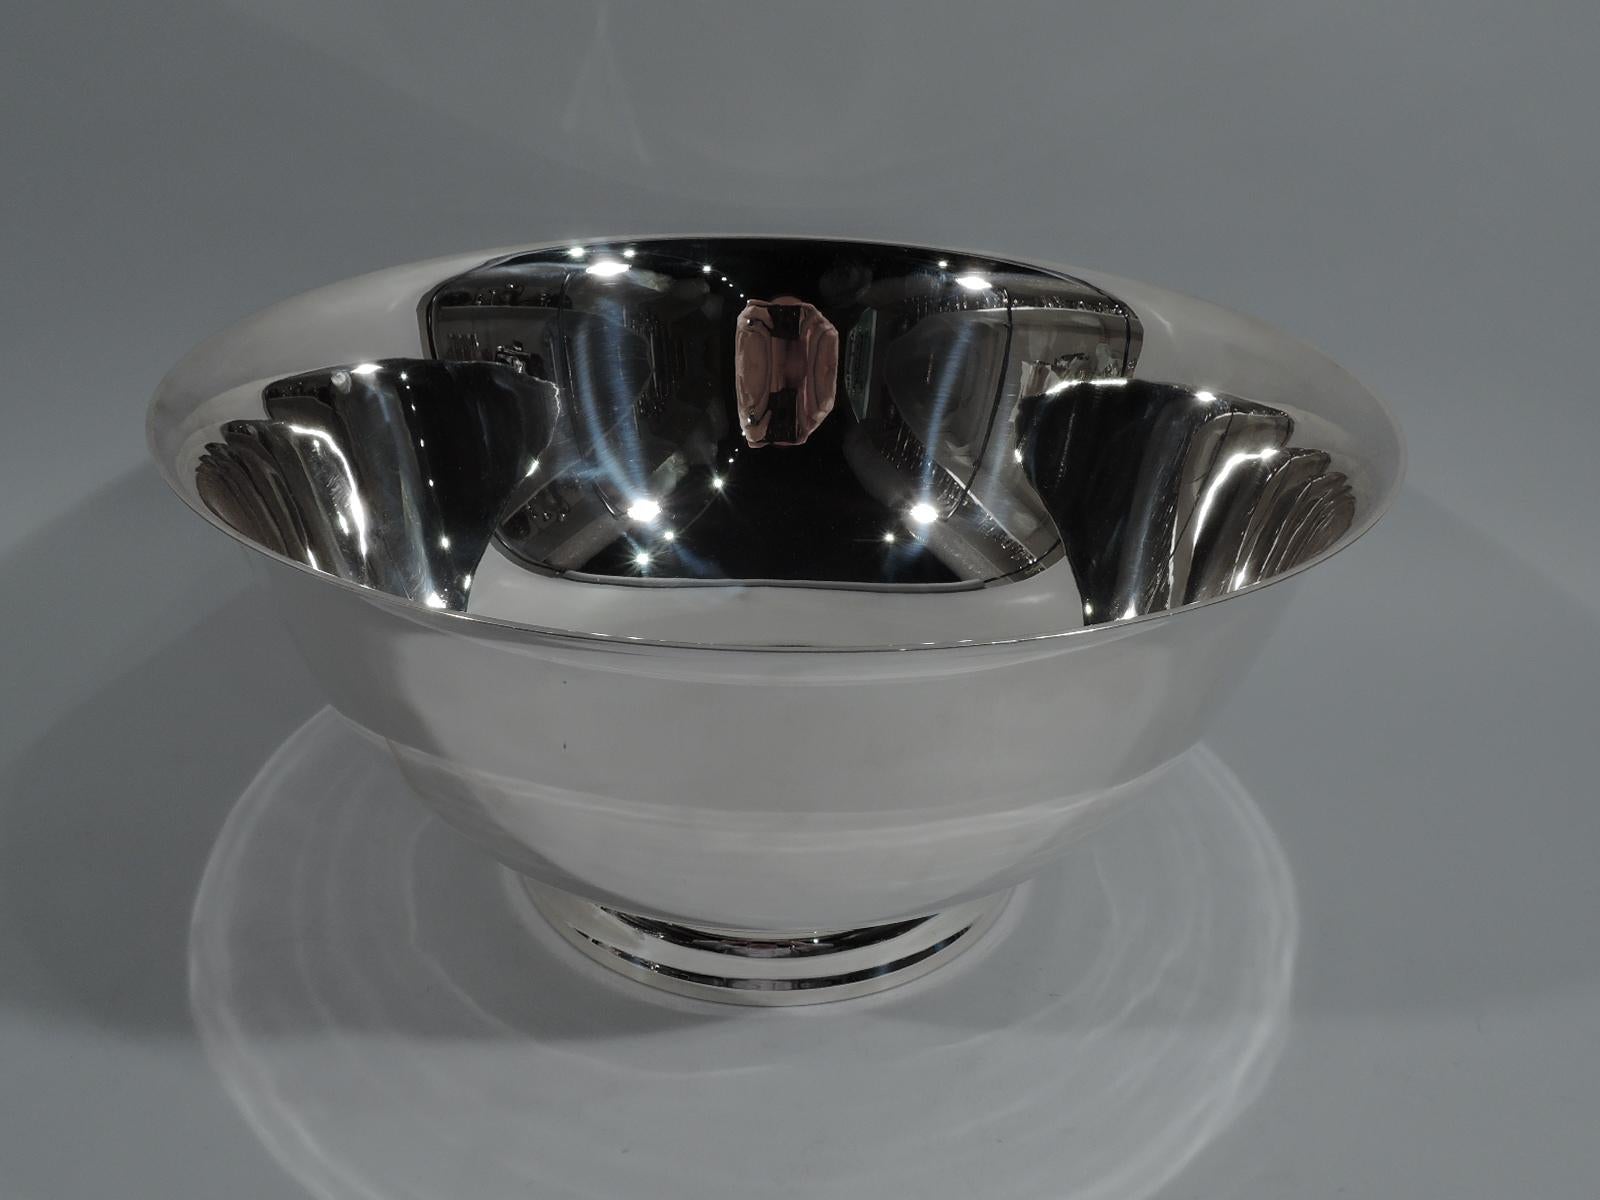 Large traditional sterling silver centerpiece Revere bowl. Curved sides, flared rim, and stepped foot. The traditional form supersized. Perfect for punch. Lots of room for engraving. Fully marked including Watson maker's stamp, no. B269, and phrase